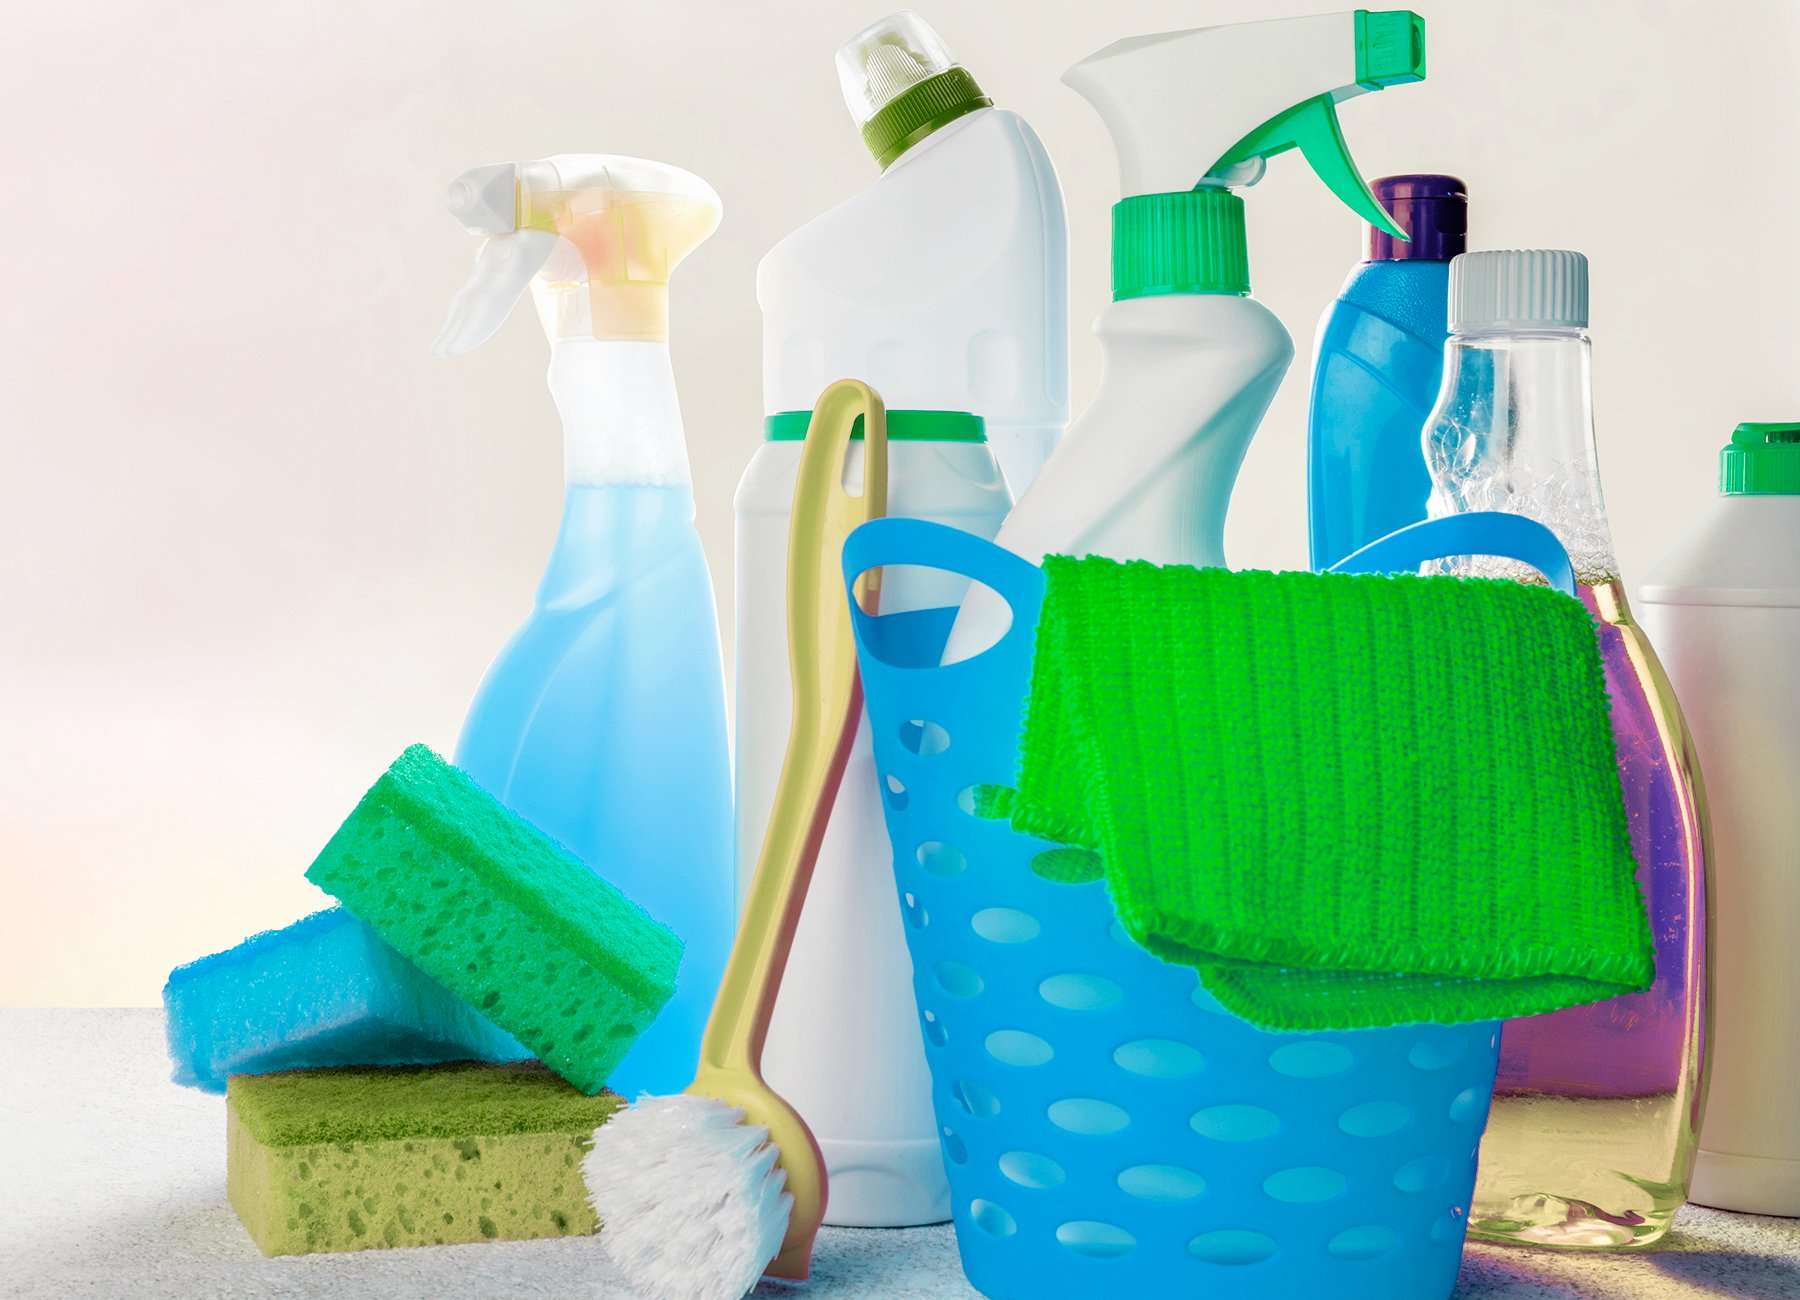 Various cleaning bottles and sponges